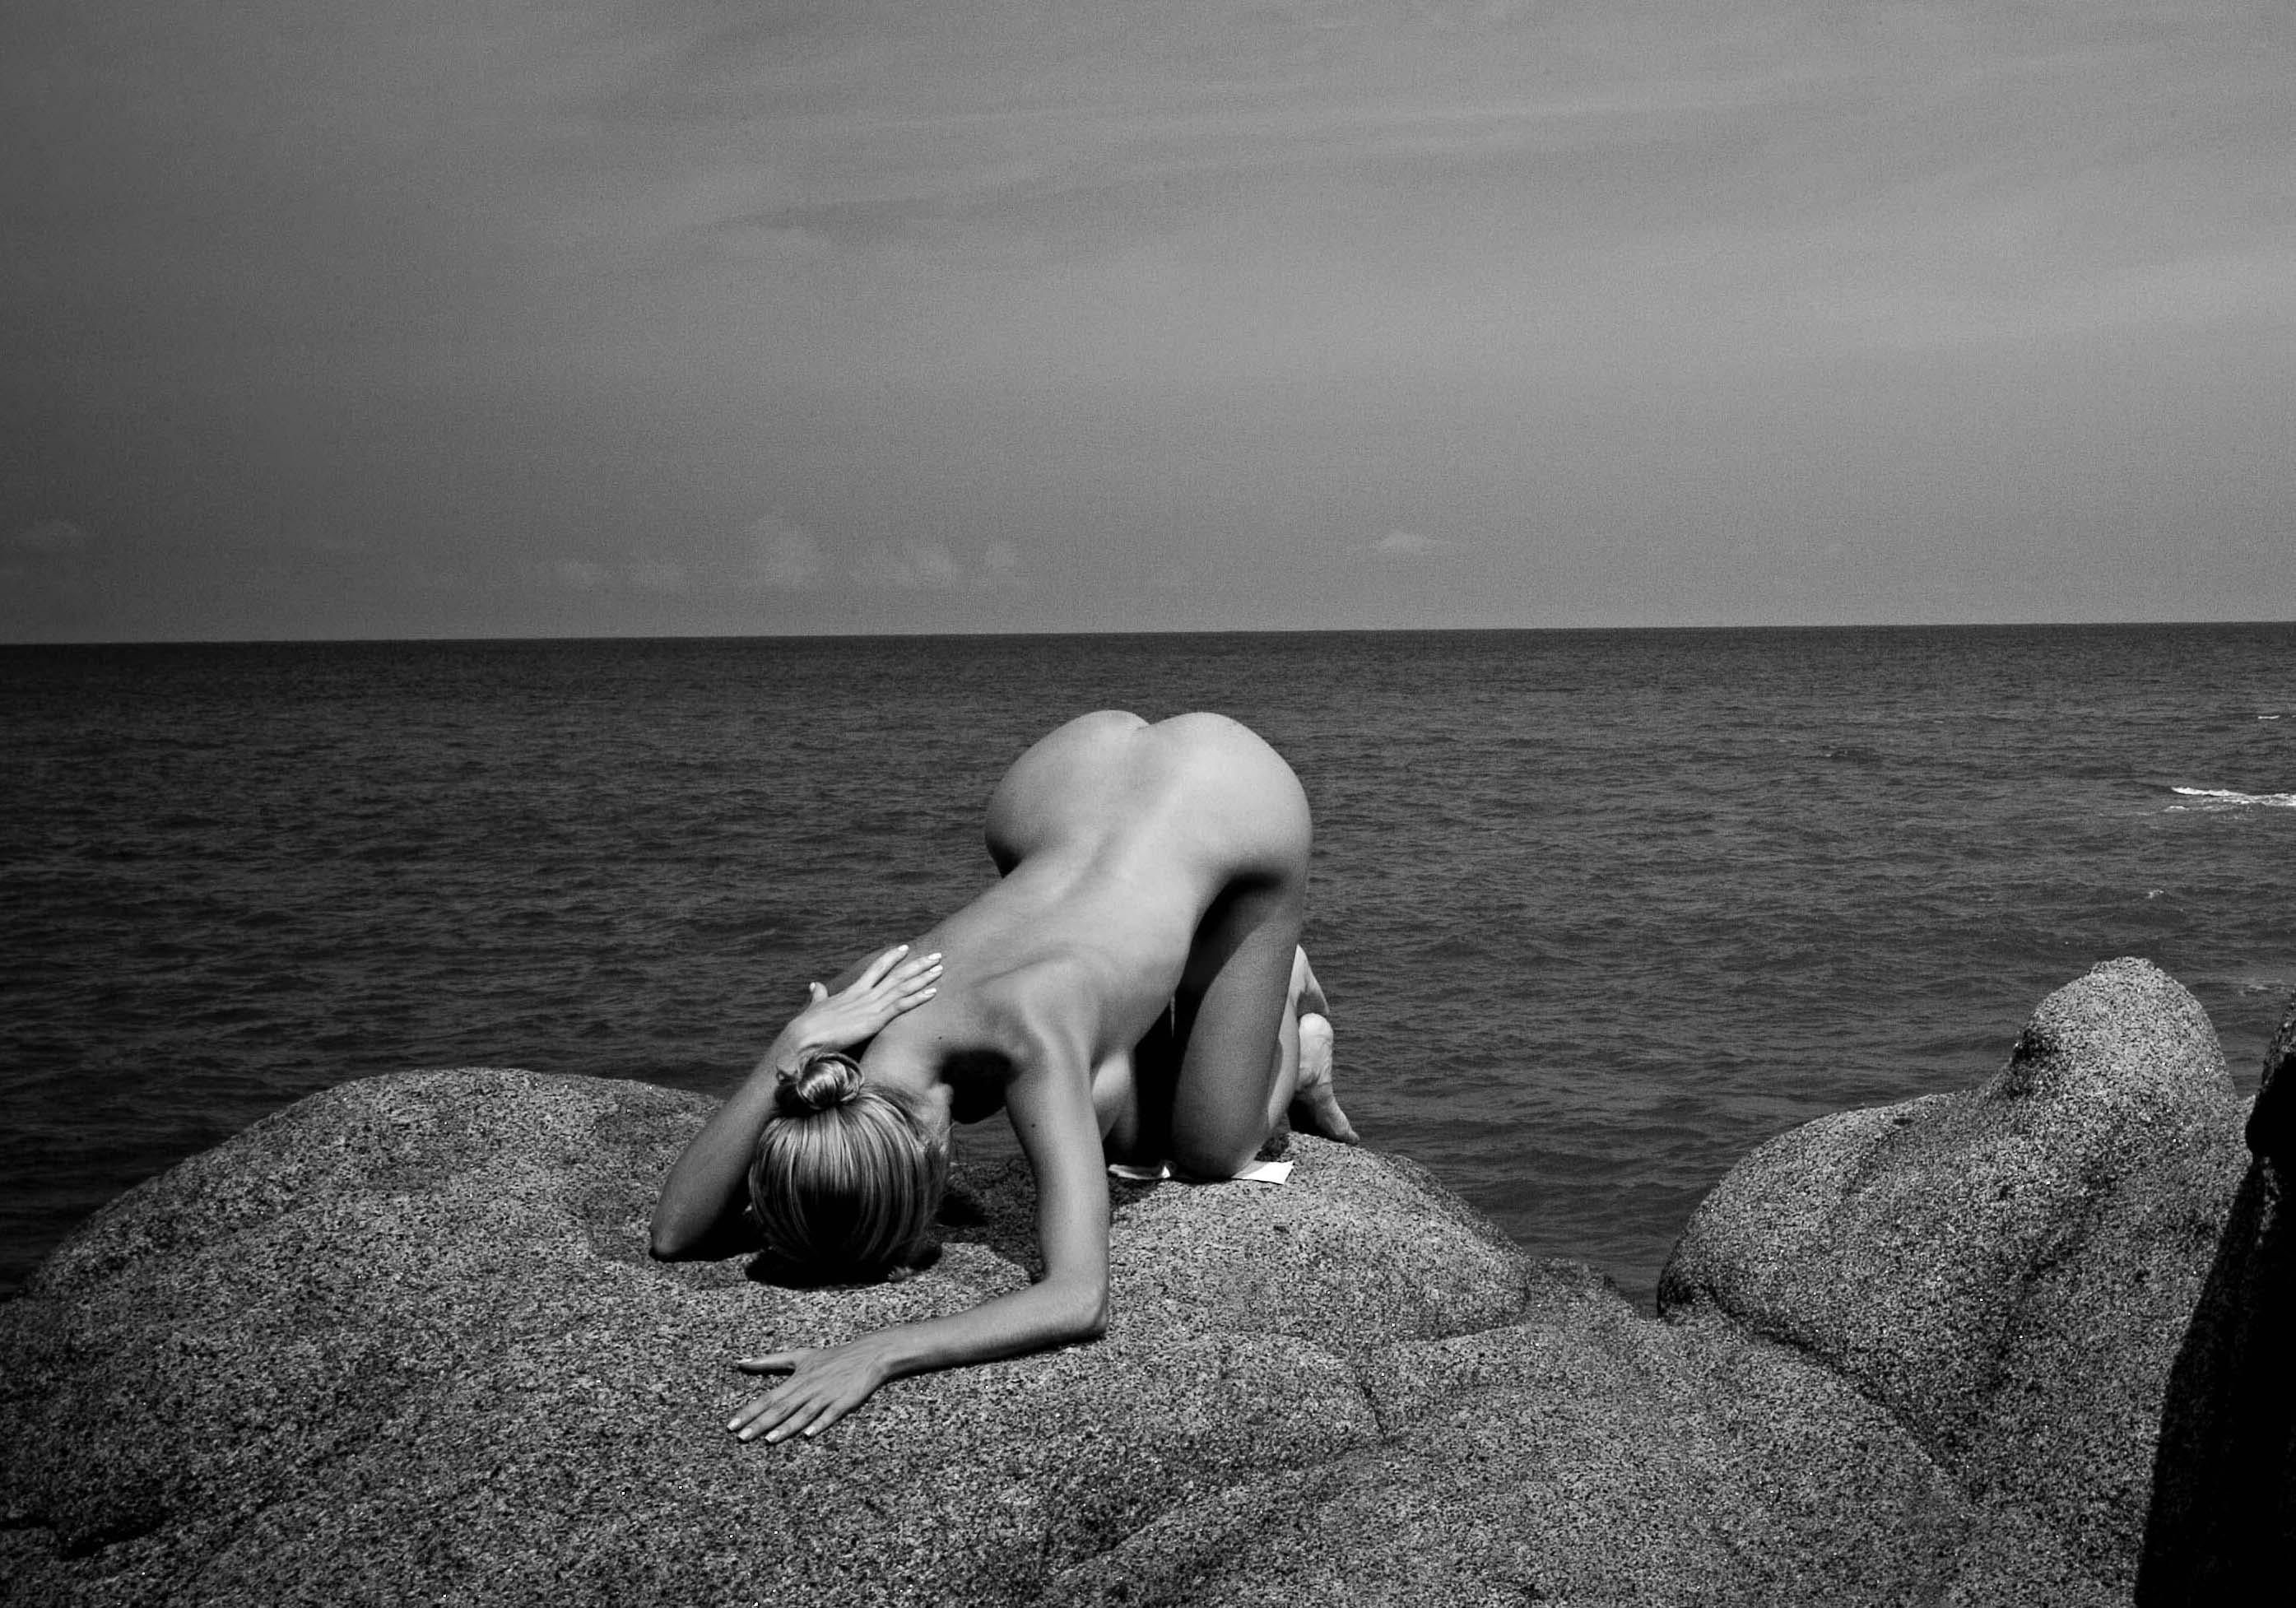 Half Angels Half Demons #13, Nude in a landscape black and white photograph - Photograph by Mauricio Velez